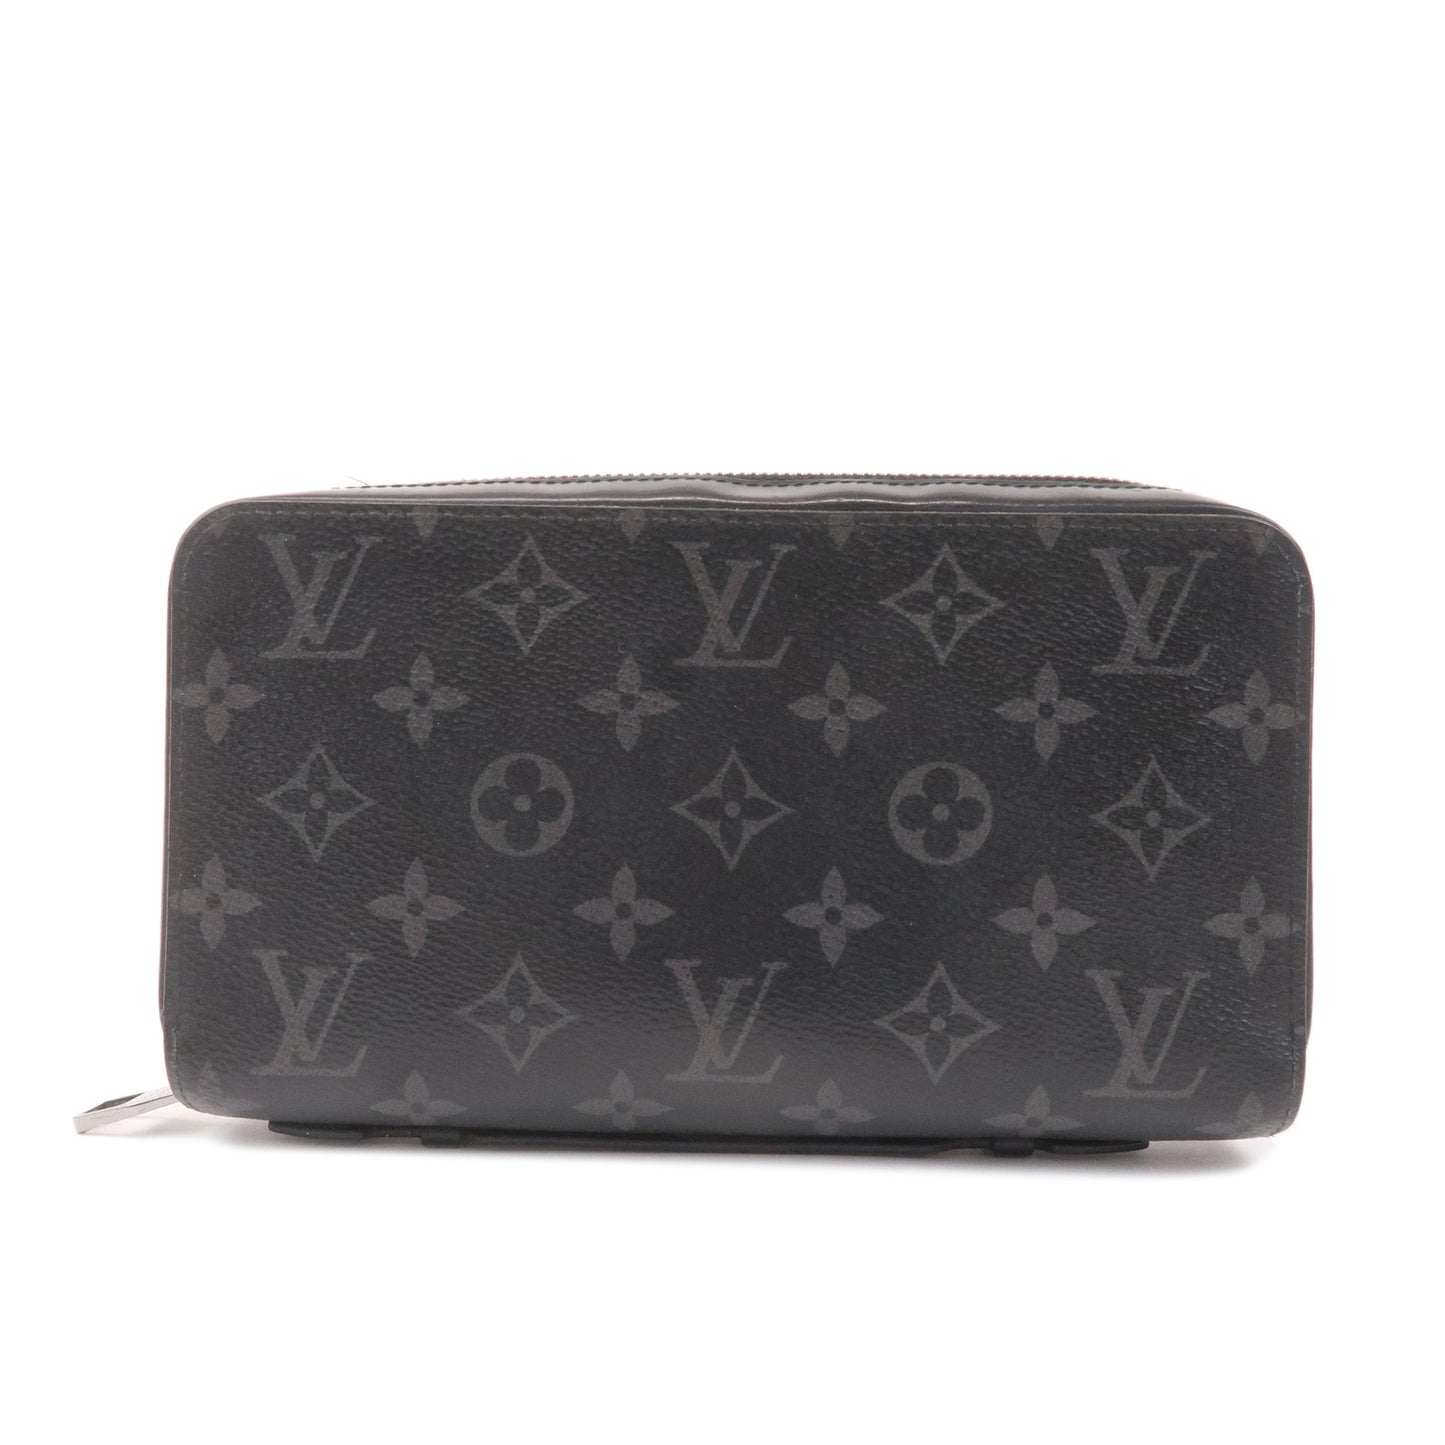 Zippy XL Wallet Monogram Eclipse - Wallets and Small Leather Goods M61698